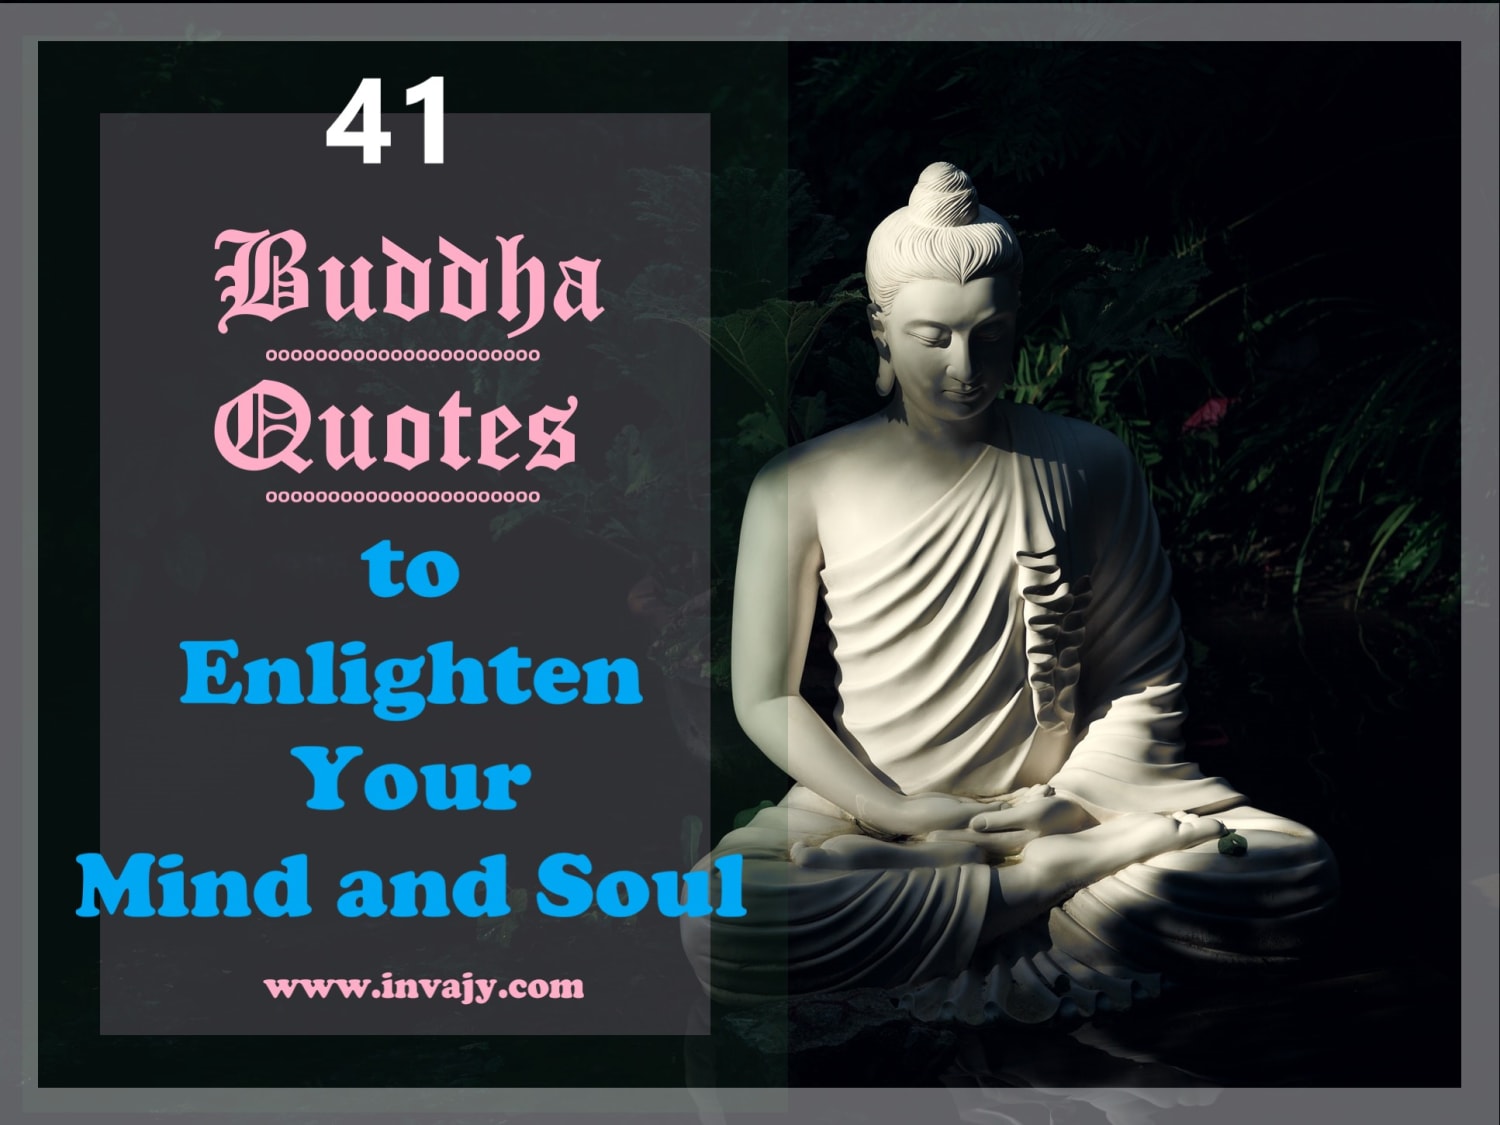 51 Buddha Quotes to Enlighten Your Mind and Soul